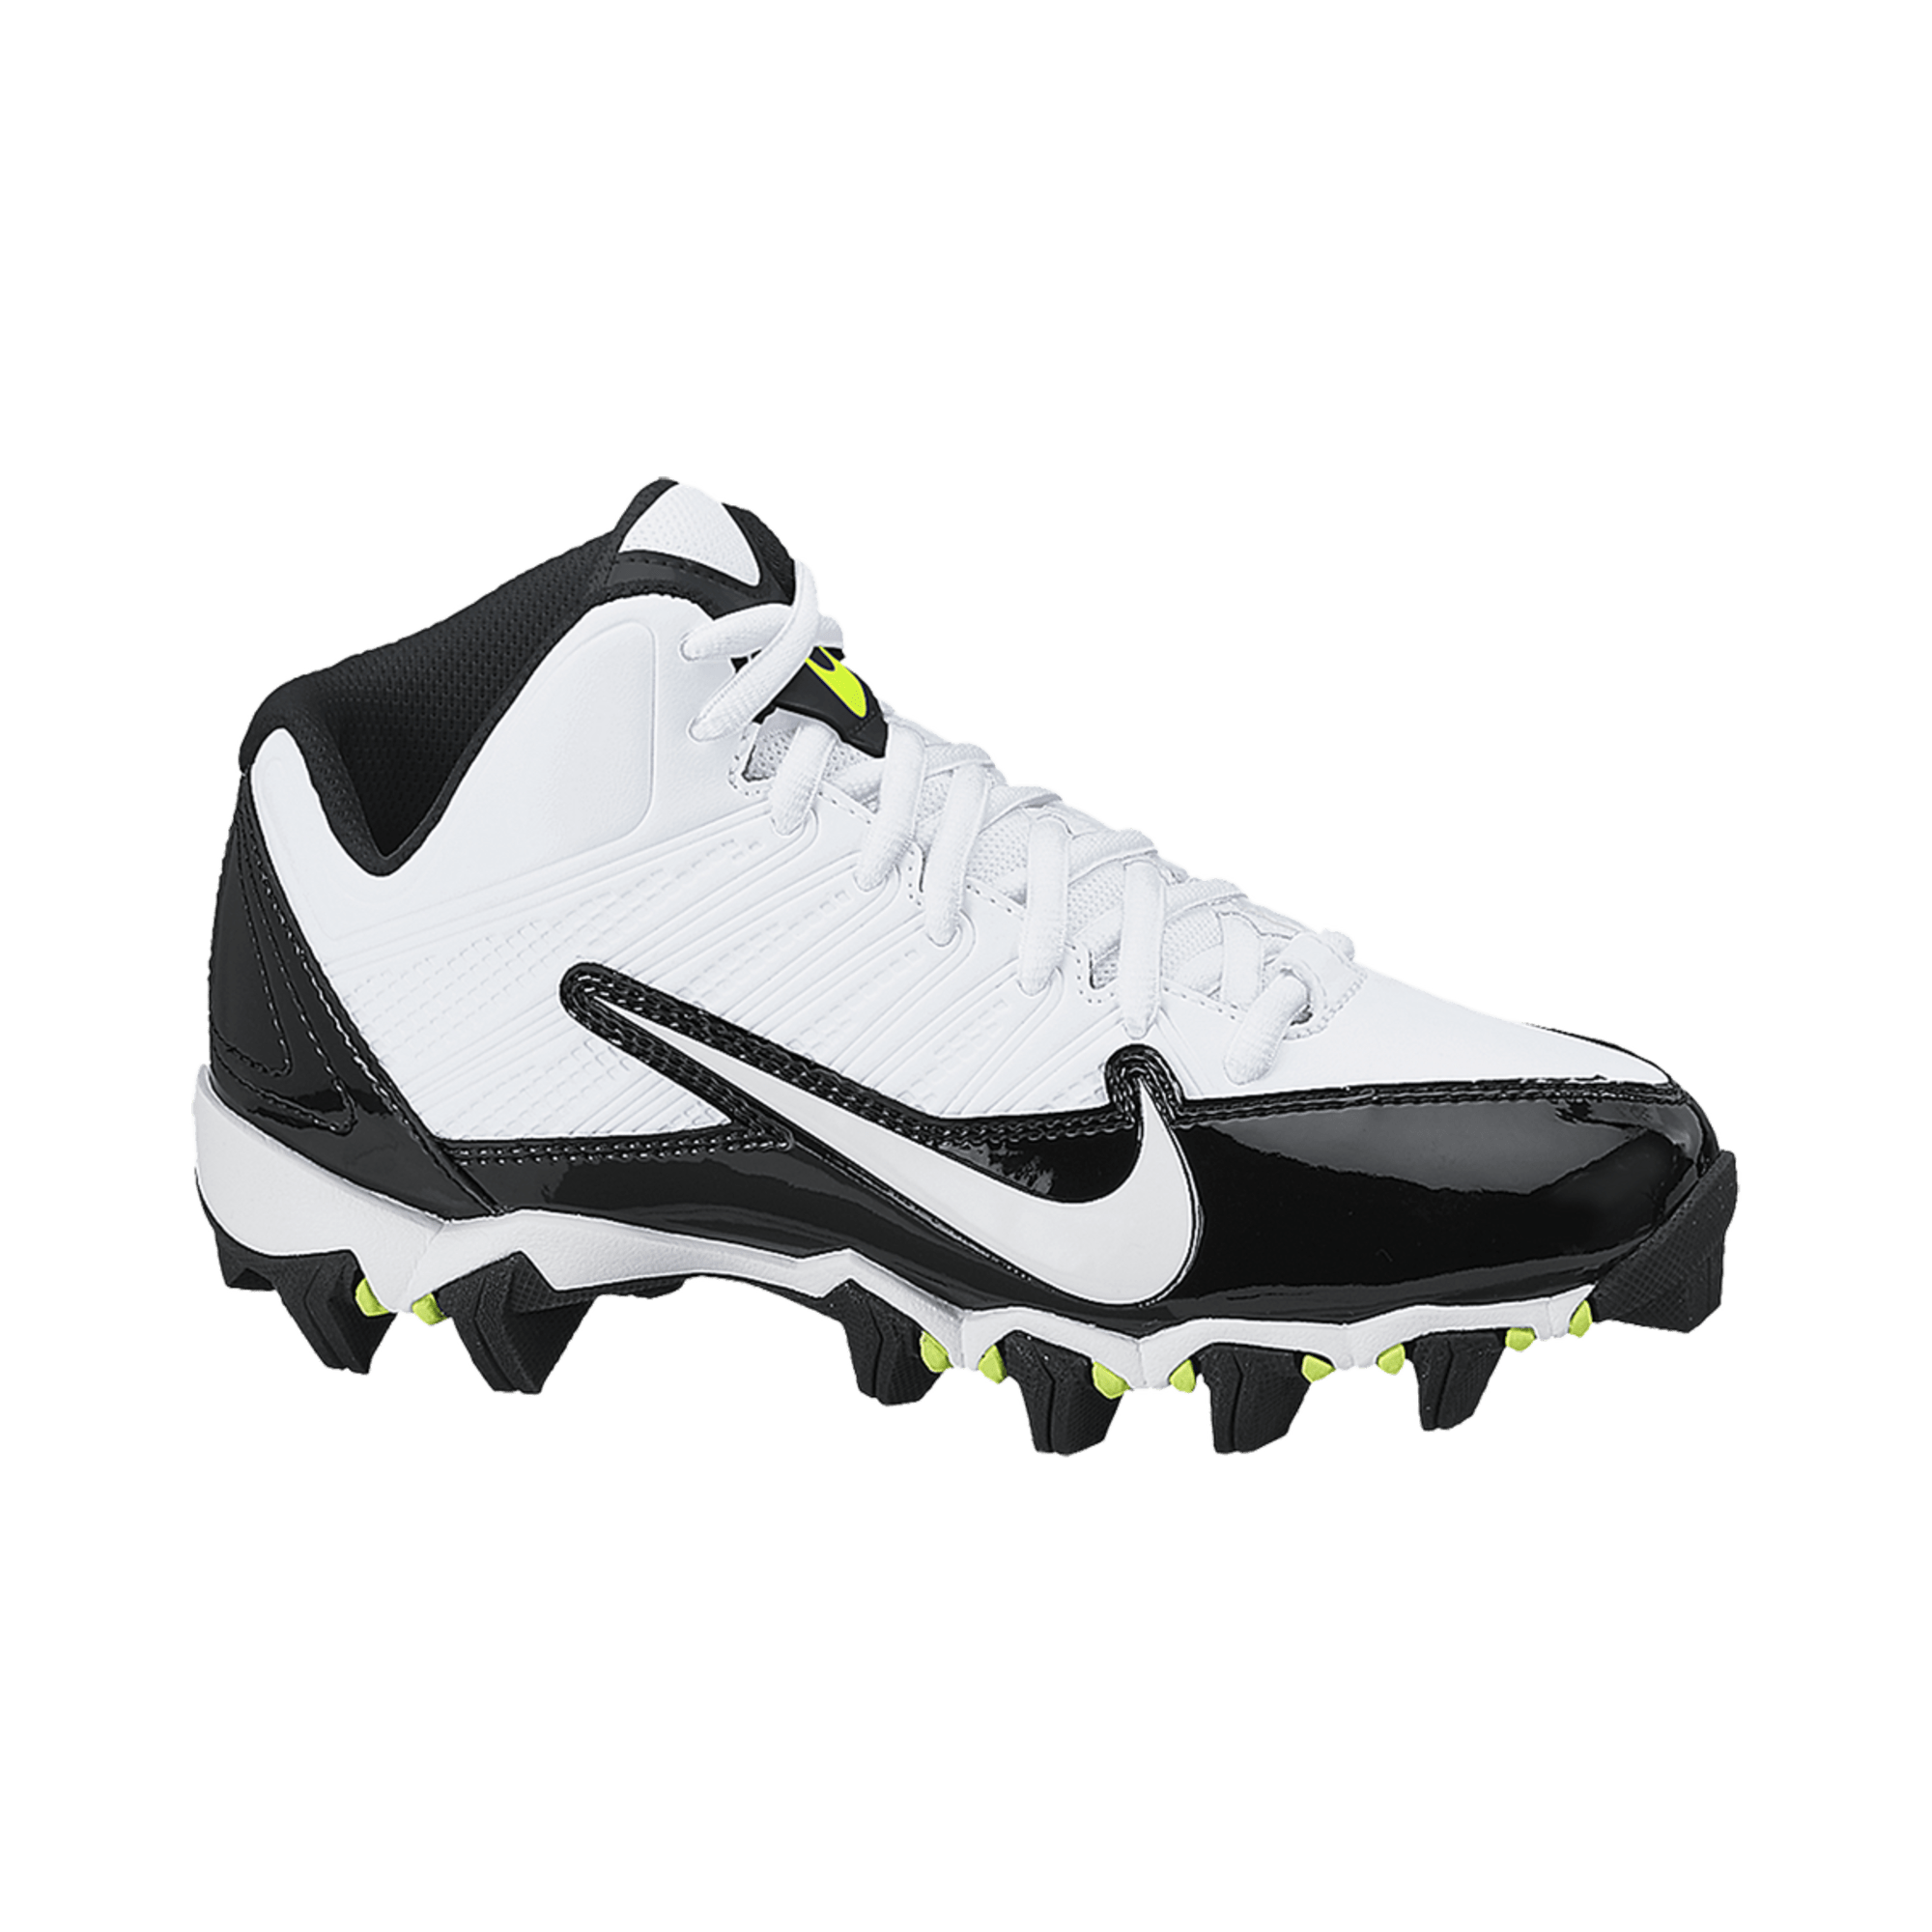 7y football cleats online -